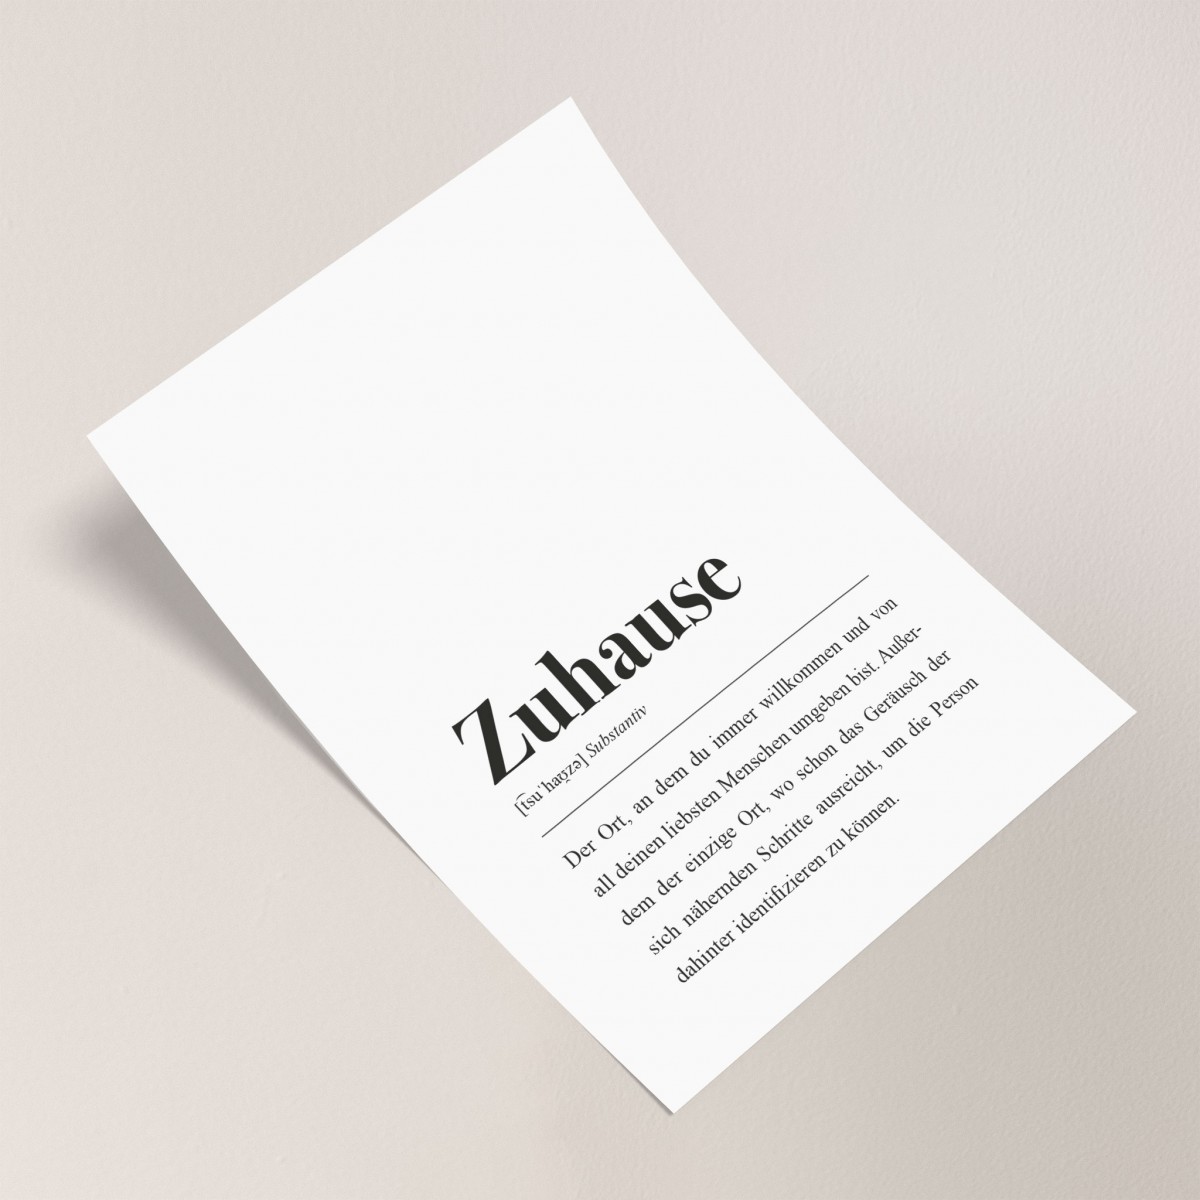 Zuhause Definition: DIN A4 Poster